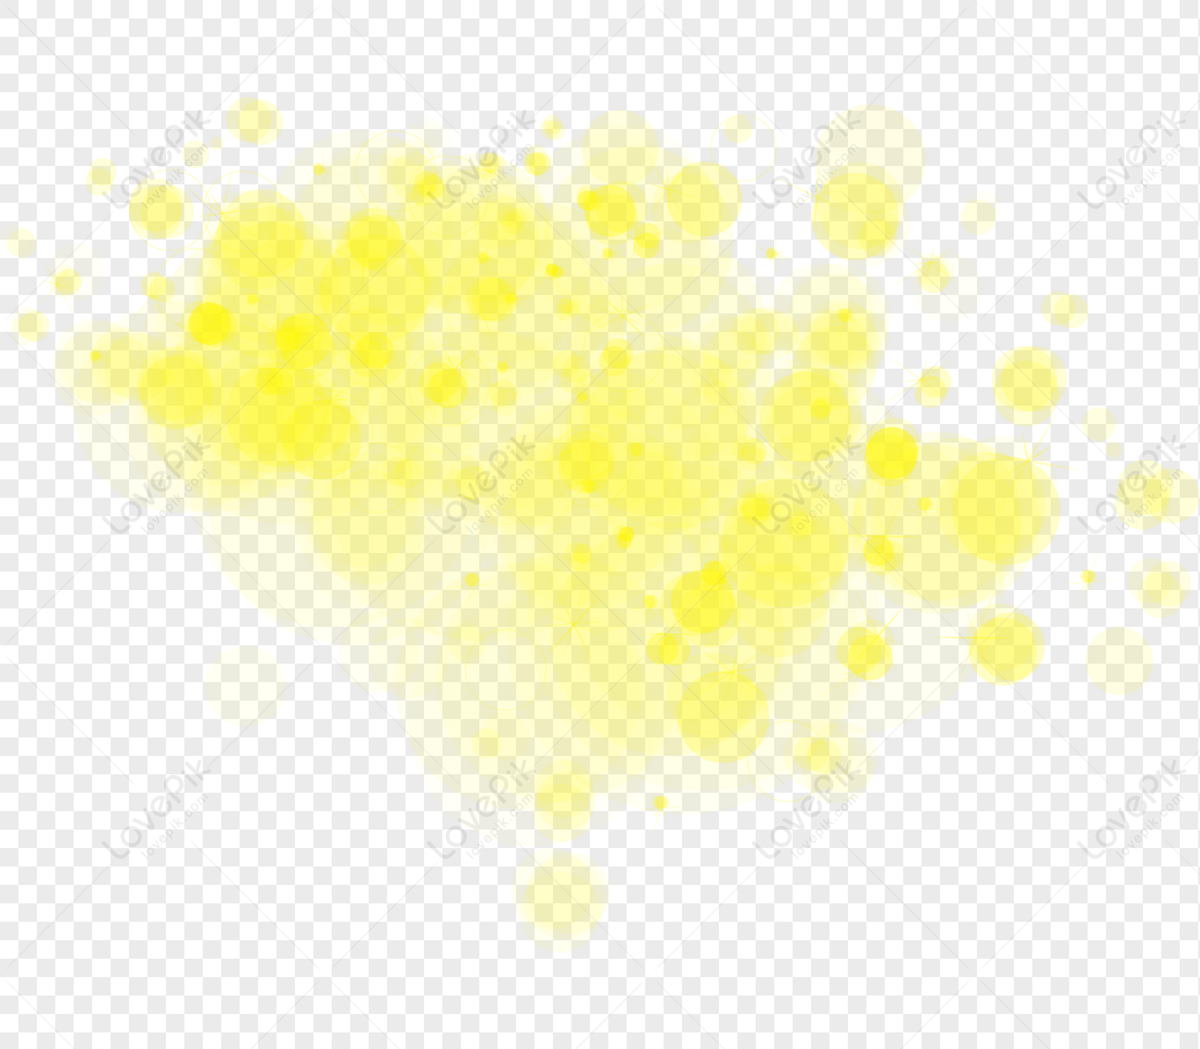 Golden Aperture Effect Element PNG Picture And Clipart Image For Free  Download - Lovepik | 401510475